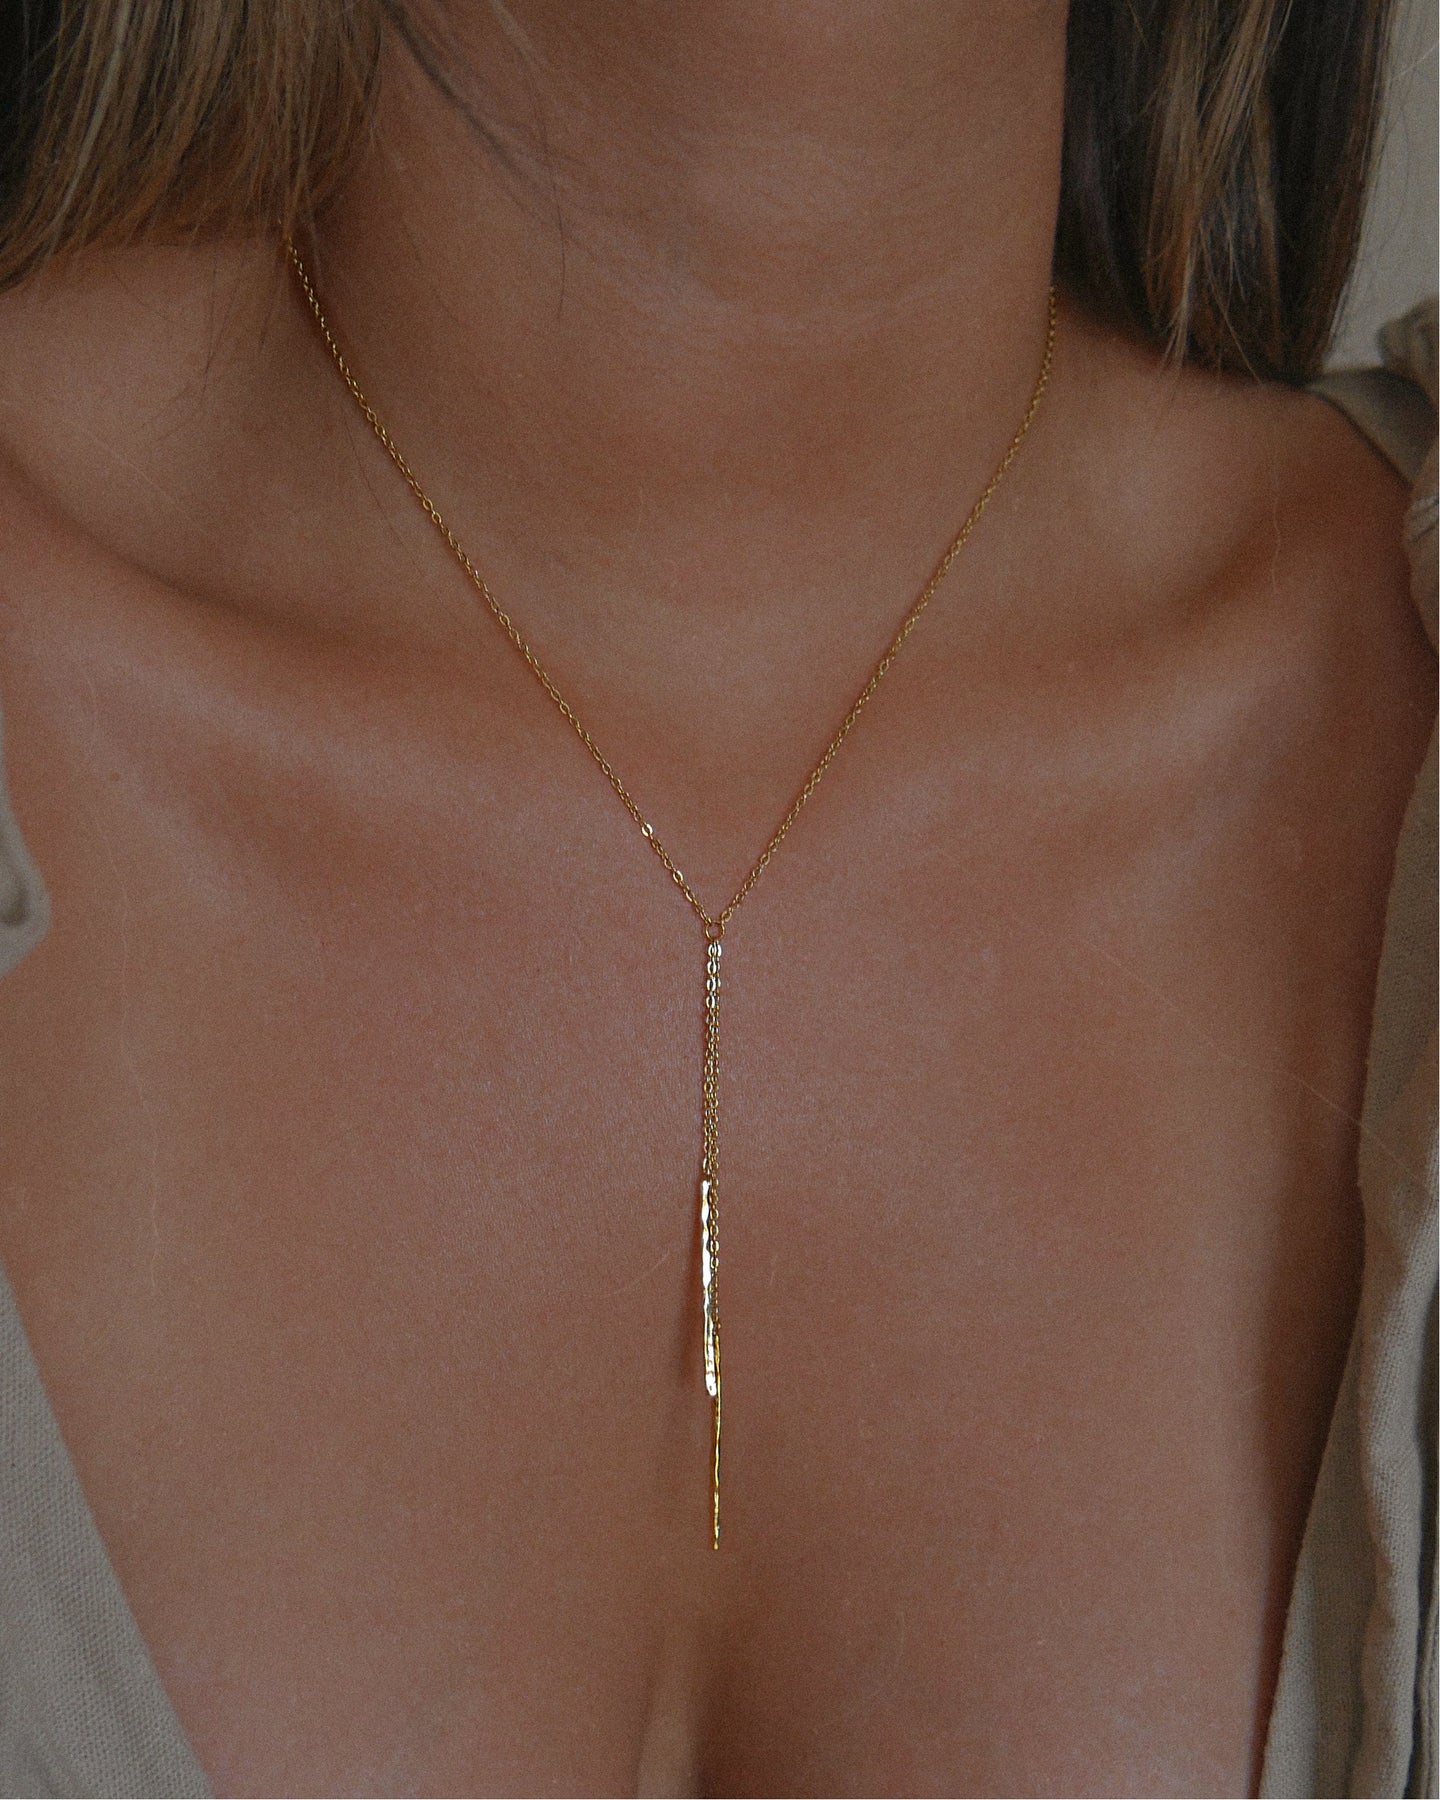 dainty thin minimalist lariat style necklace with hammered metal bar pendants